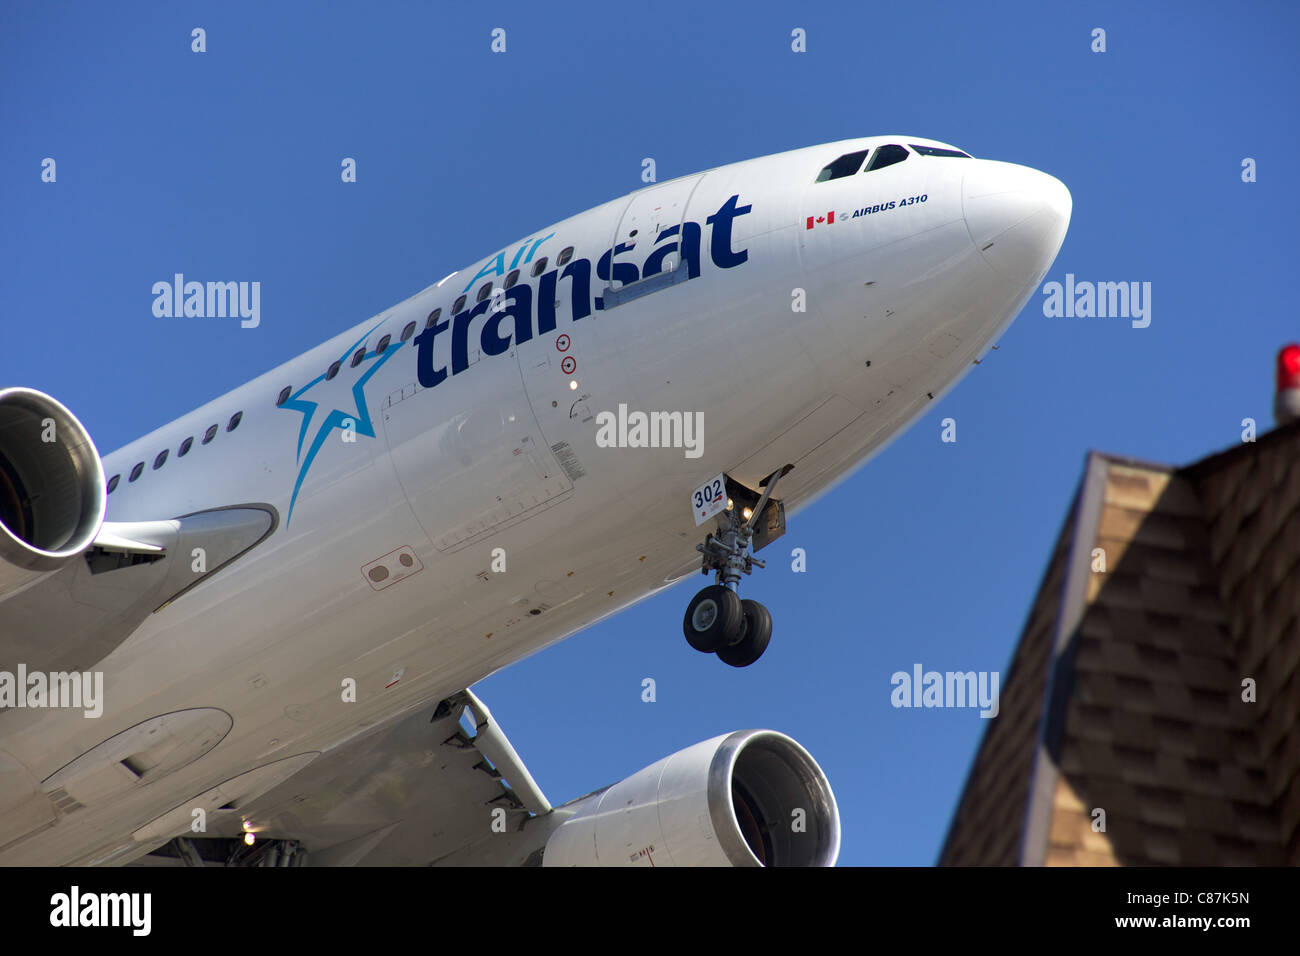 Air Transat A310 landing at Pearson Airport in Toronto flying over a building on final approach. Stock Photo